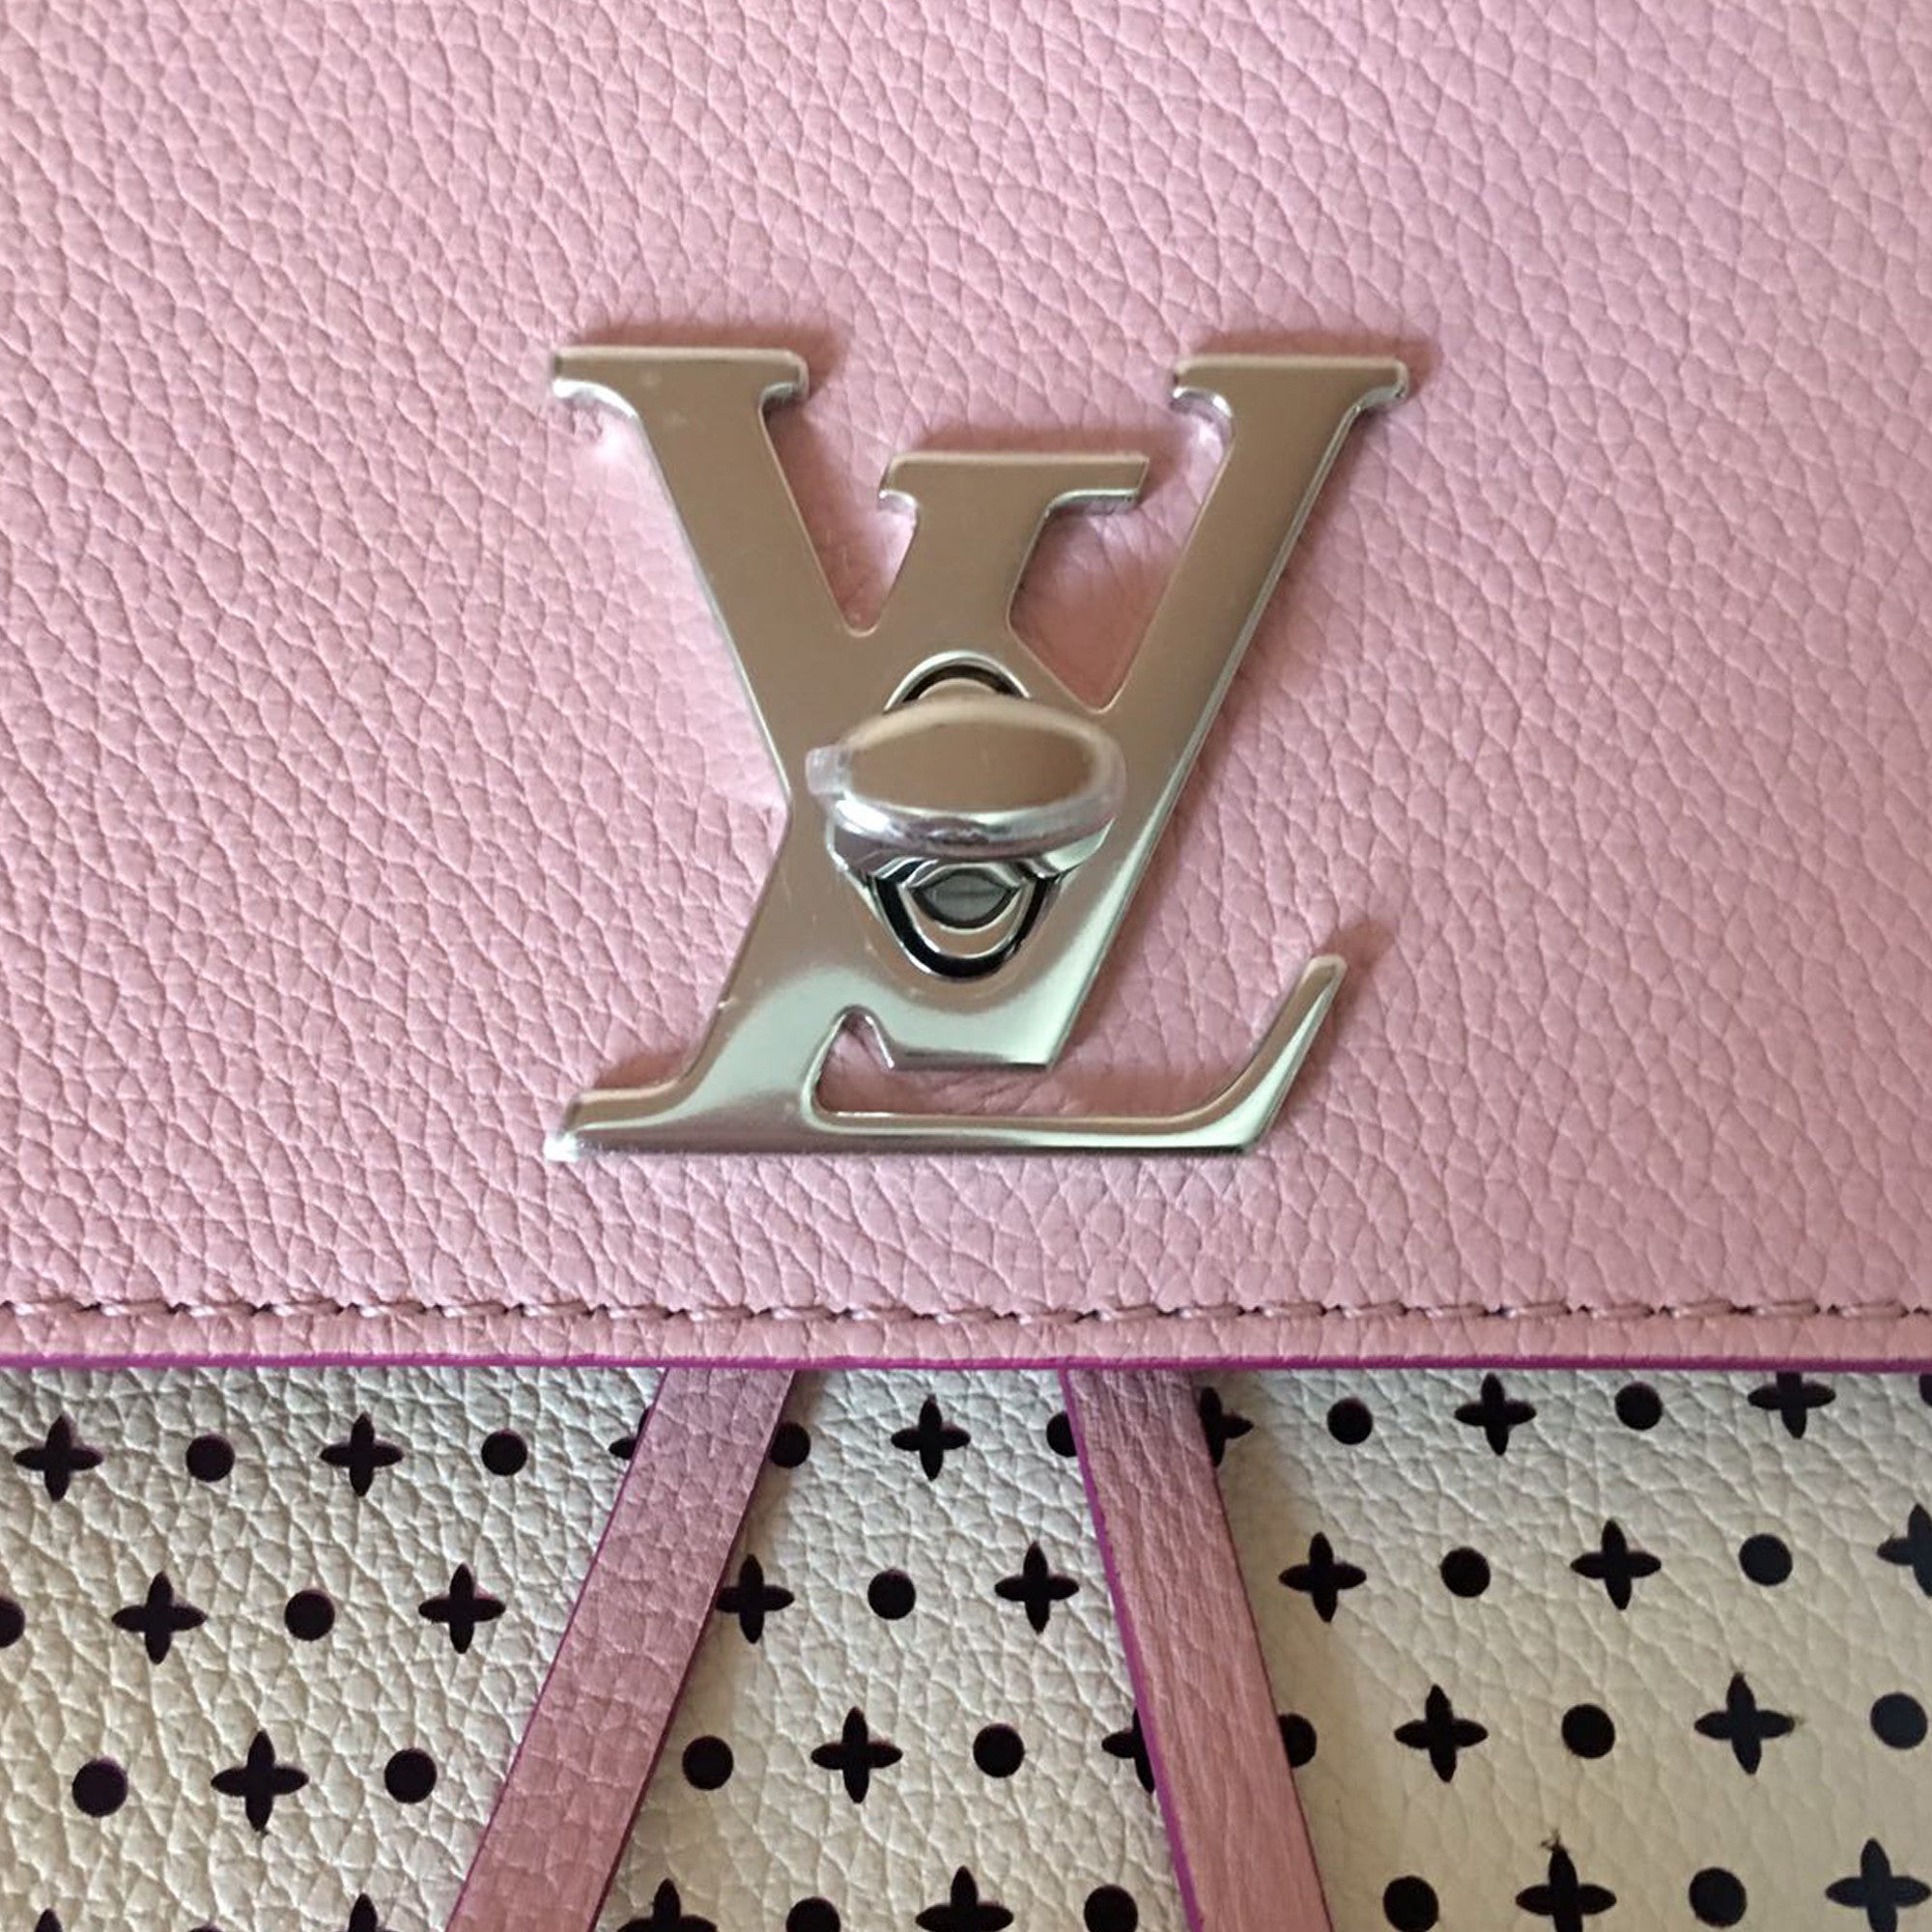 lv backpack for ladies